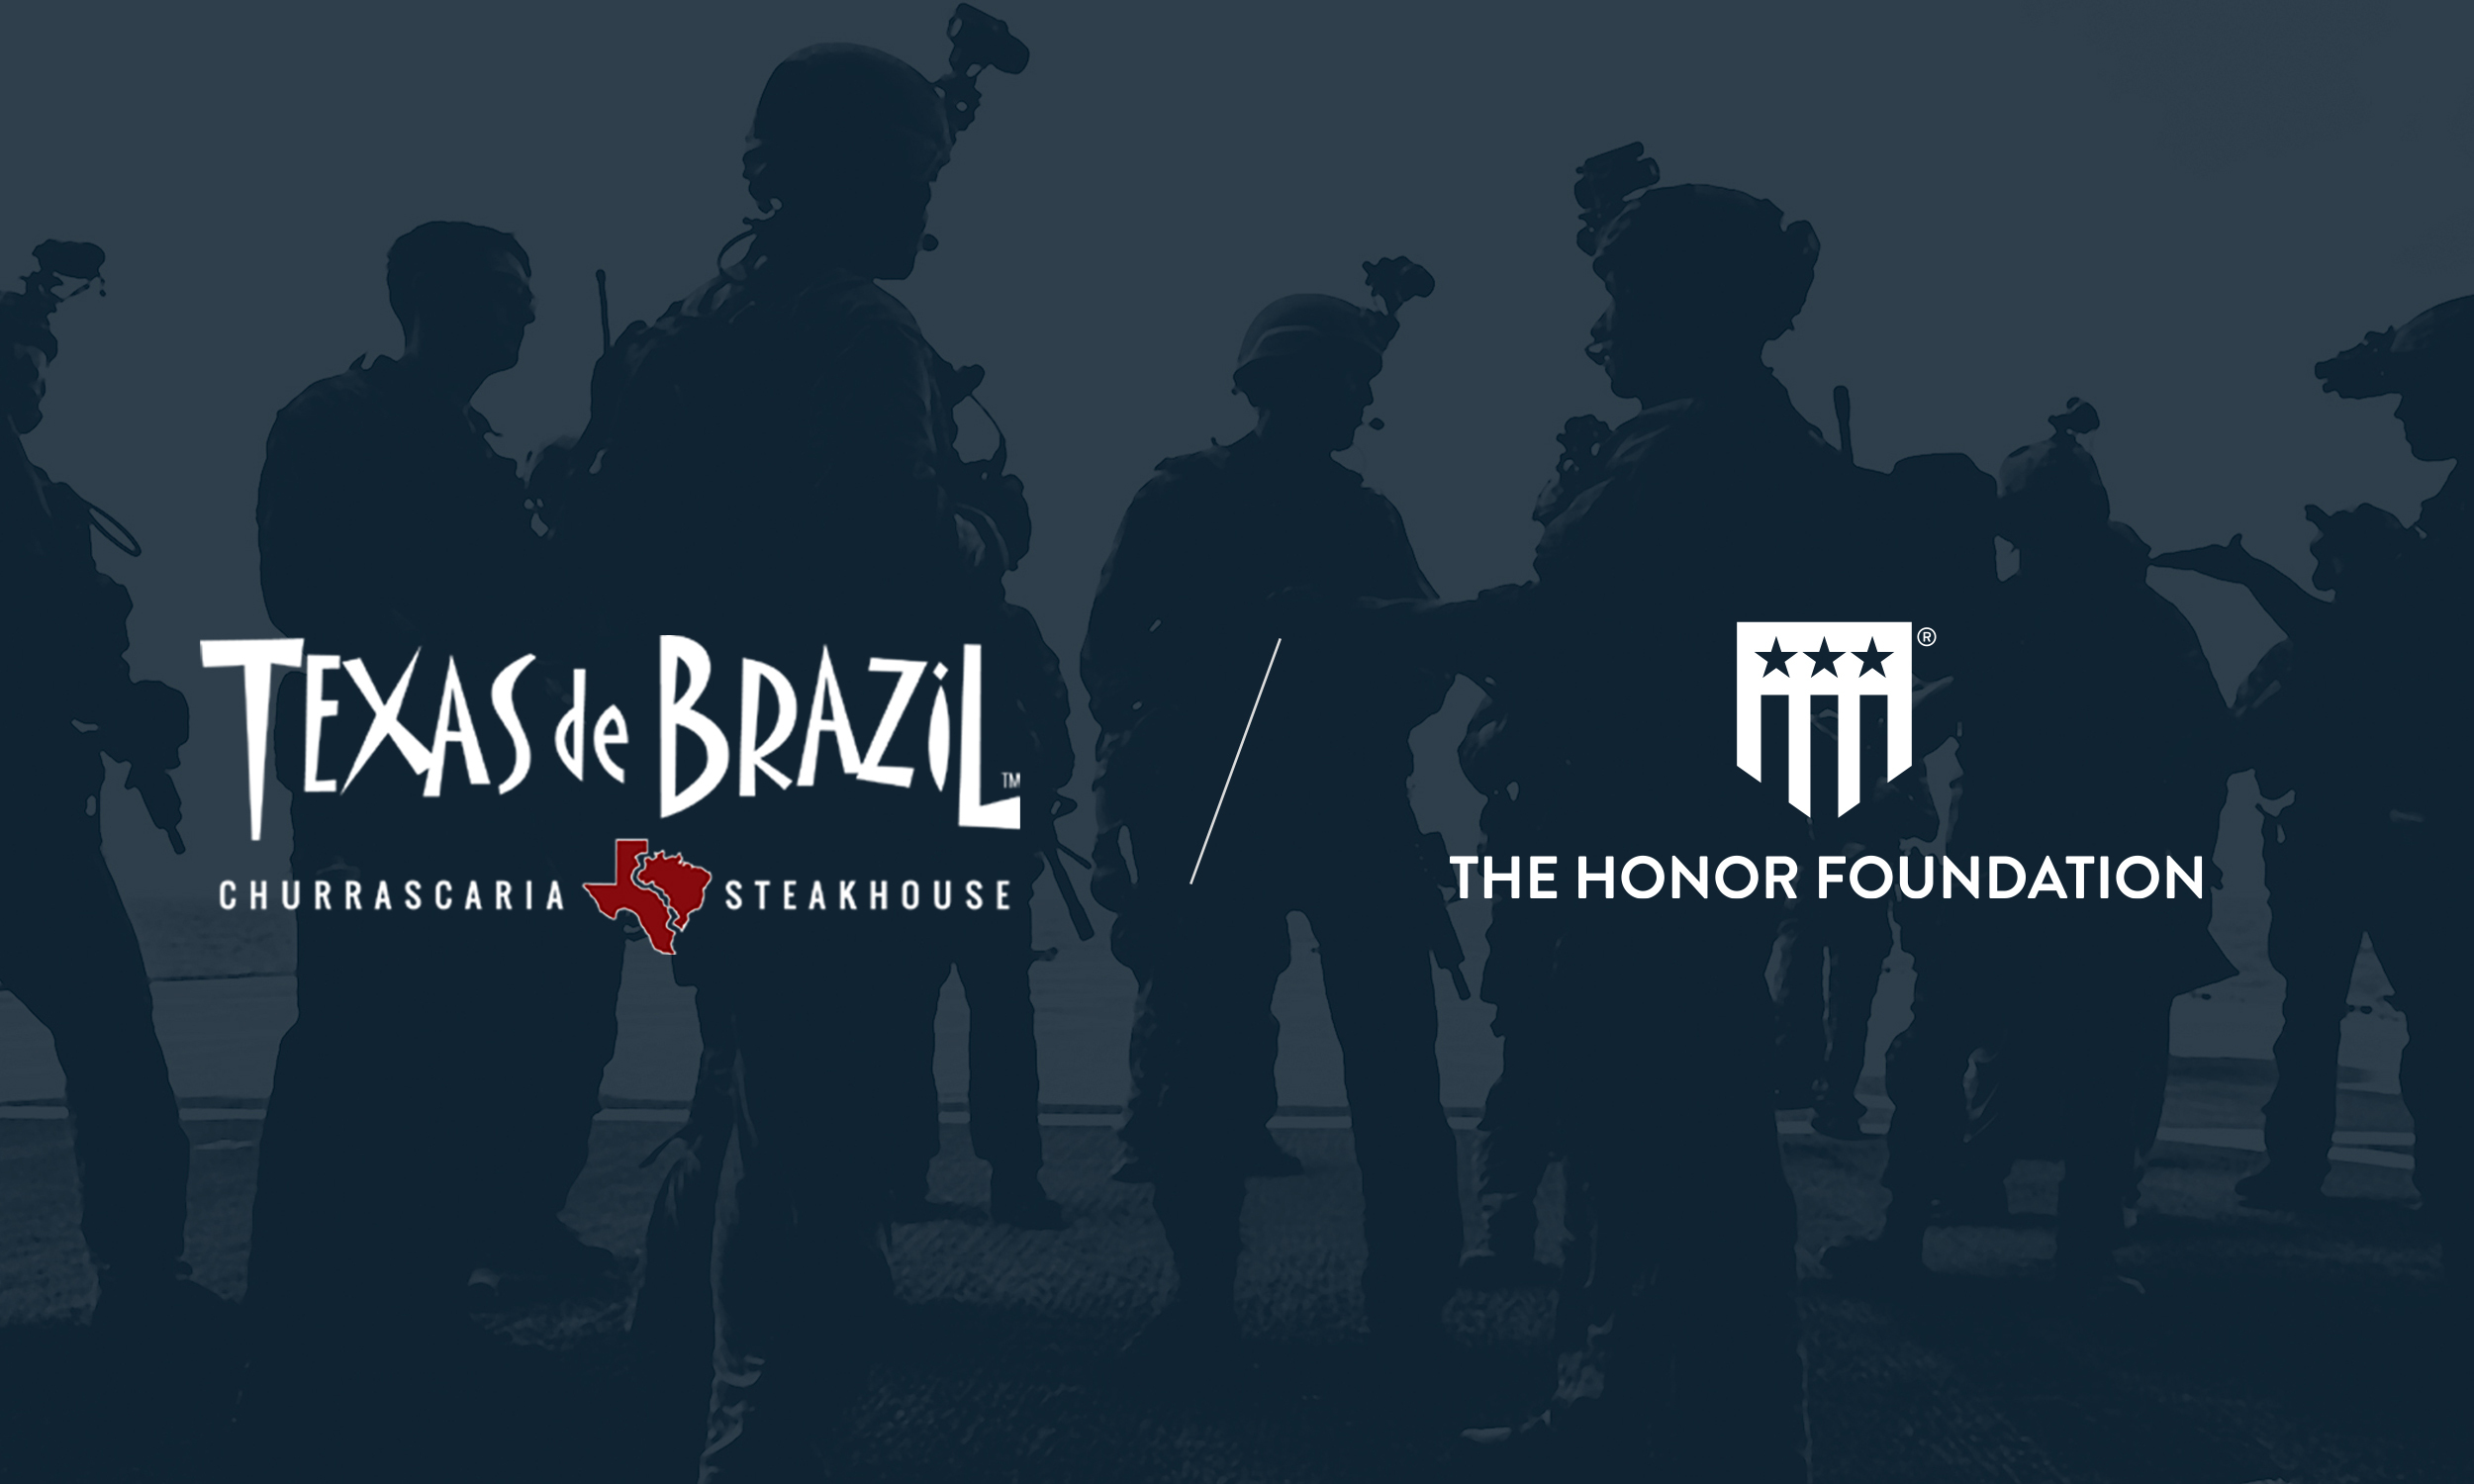 Texas de Brazil partners with The Honor Foundation